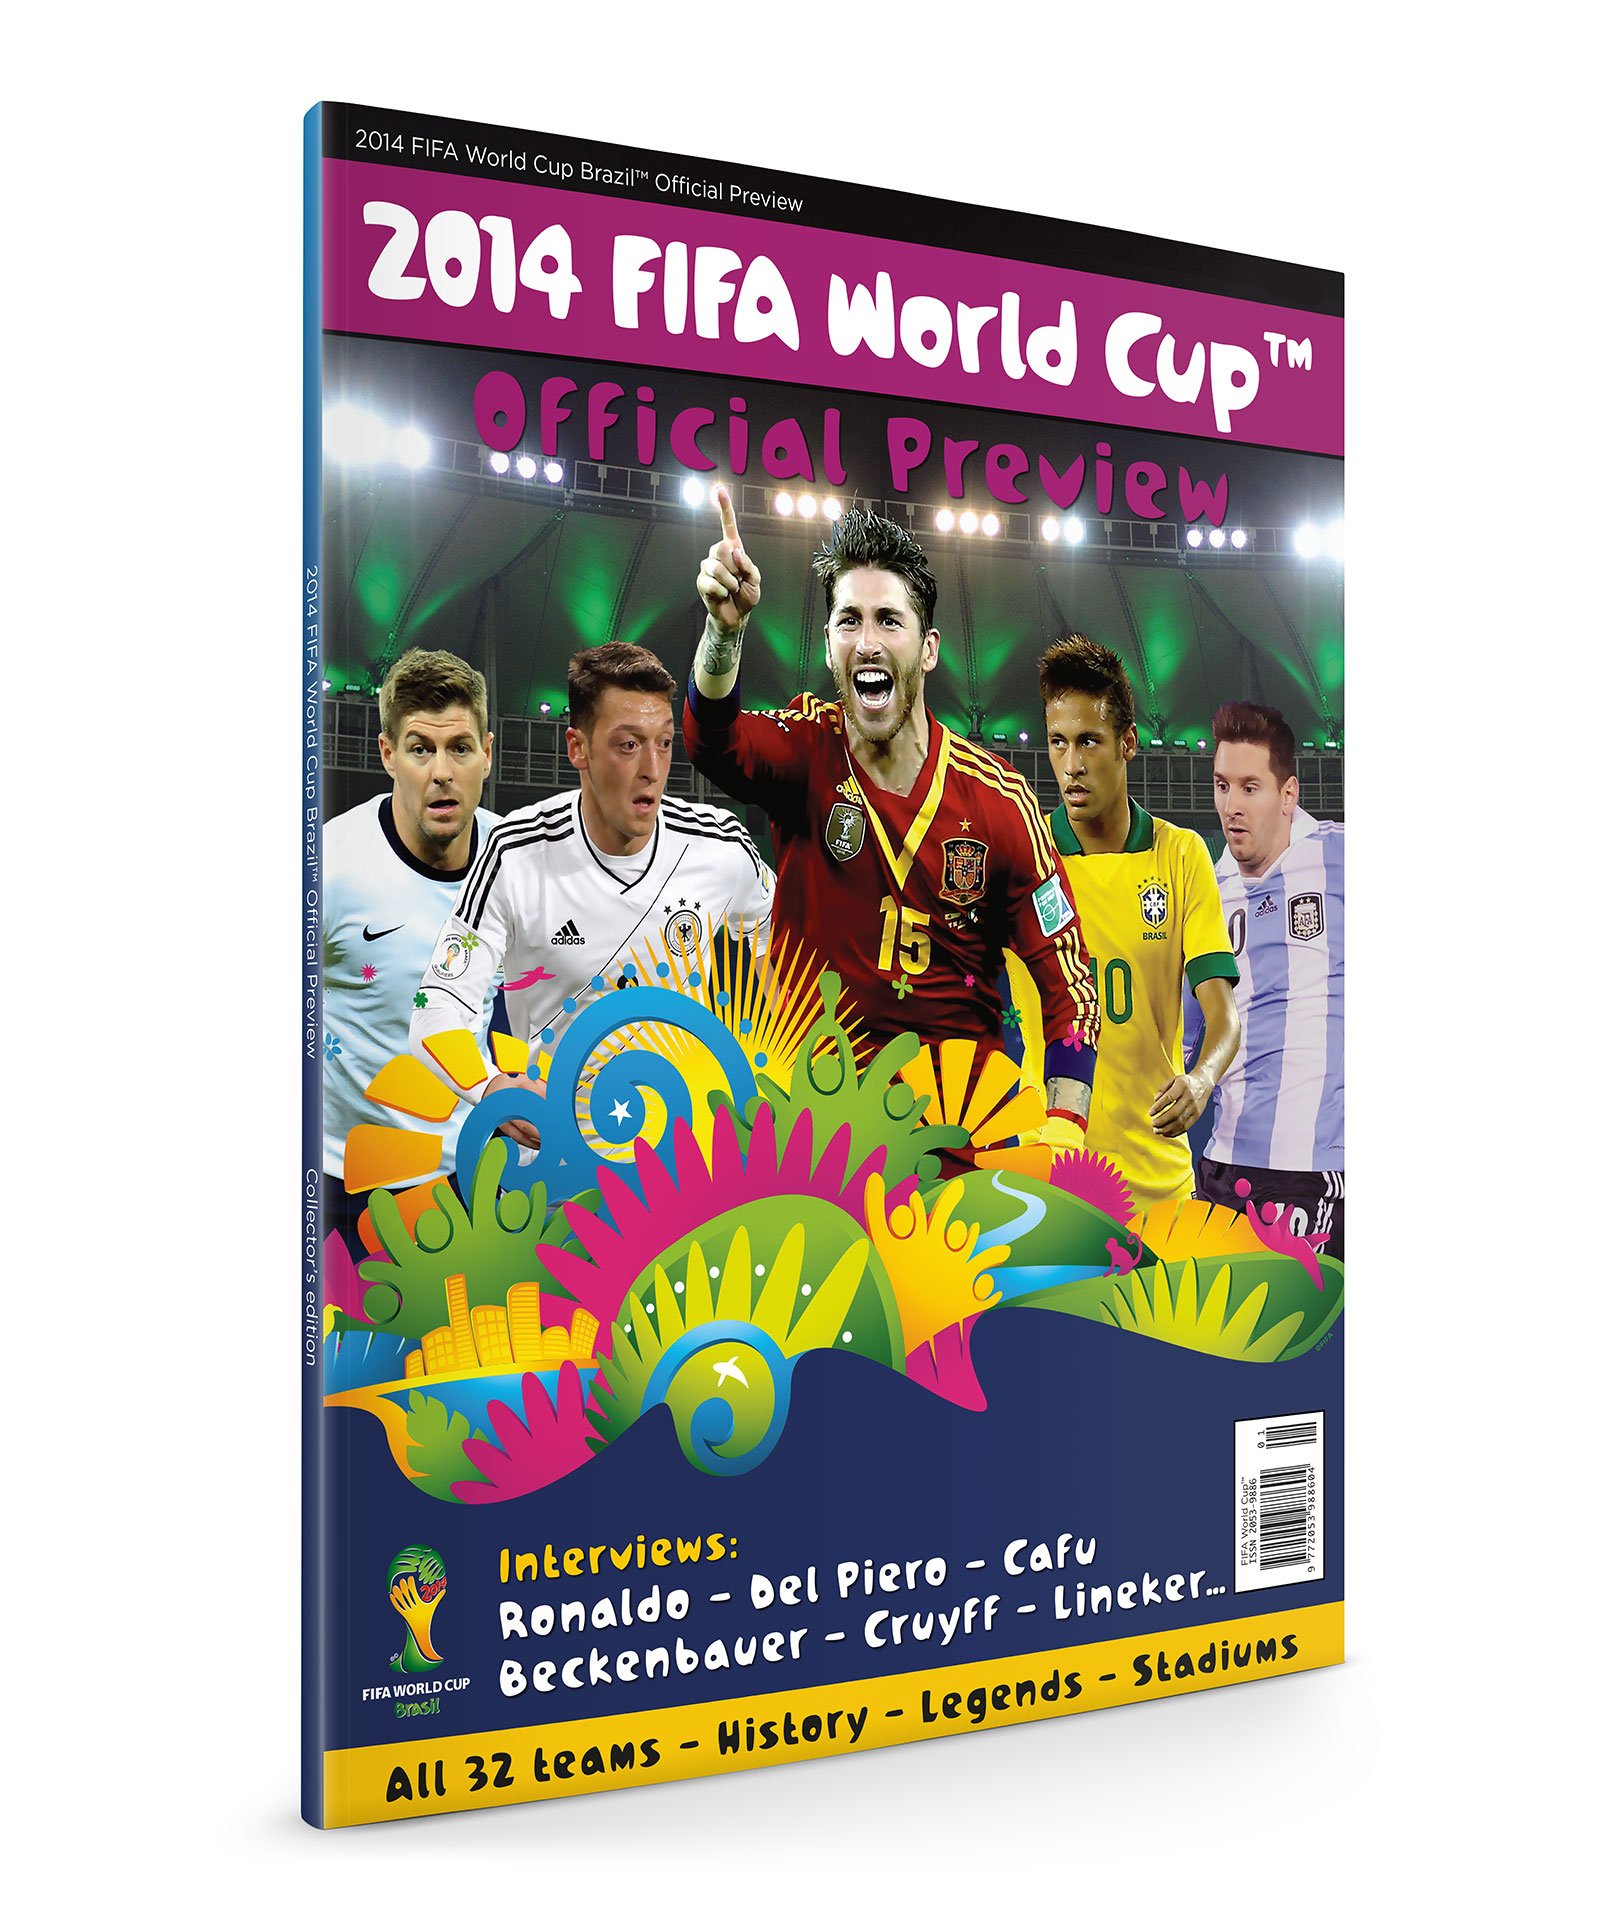 2014 FIFA World Cup - Official Preview